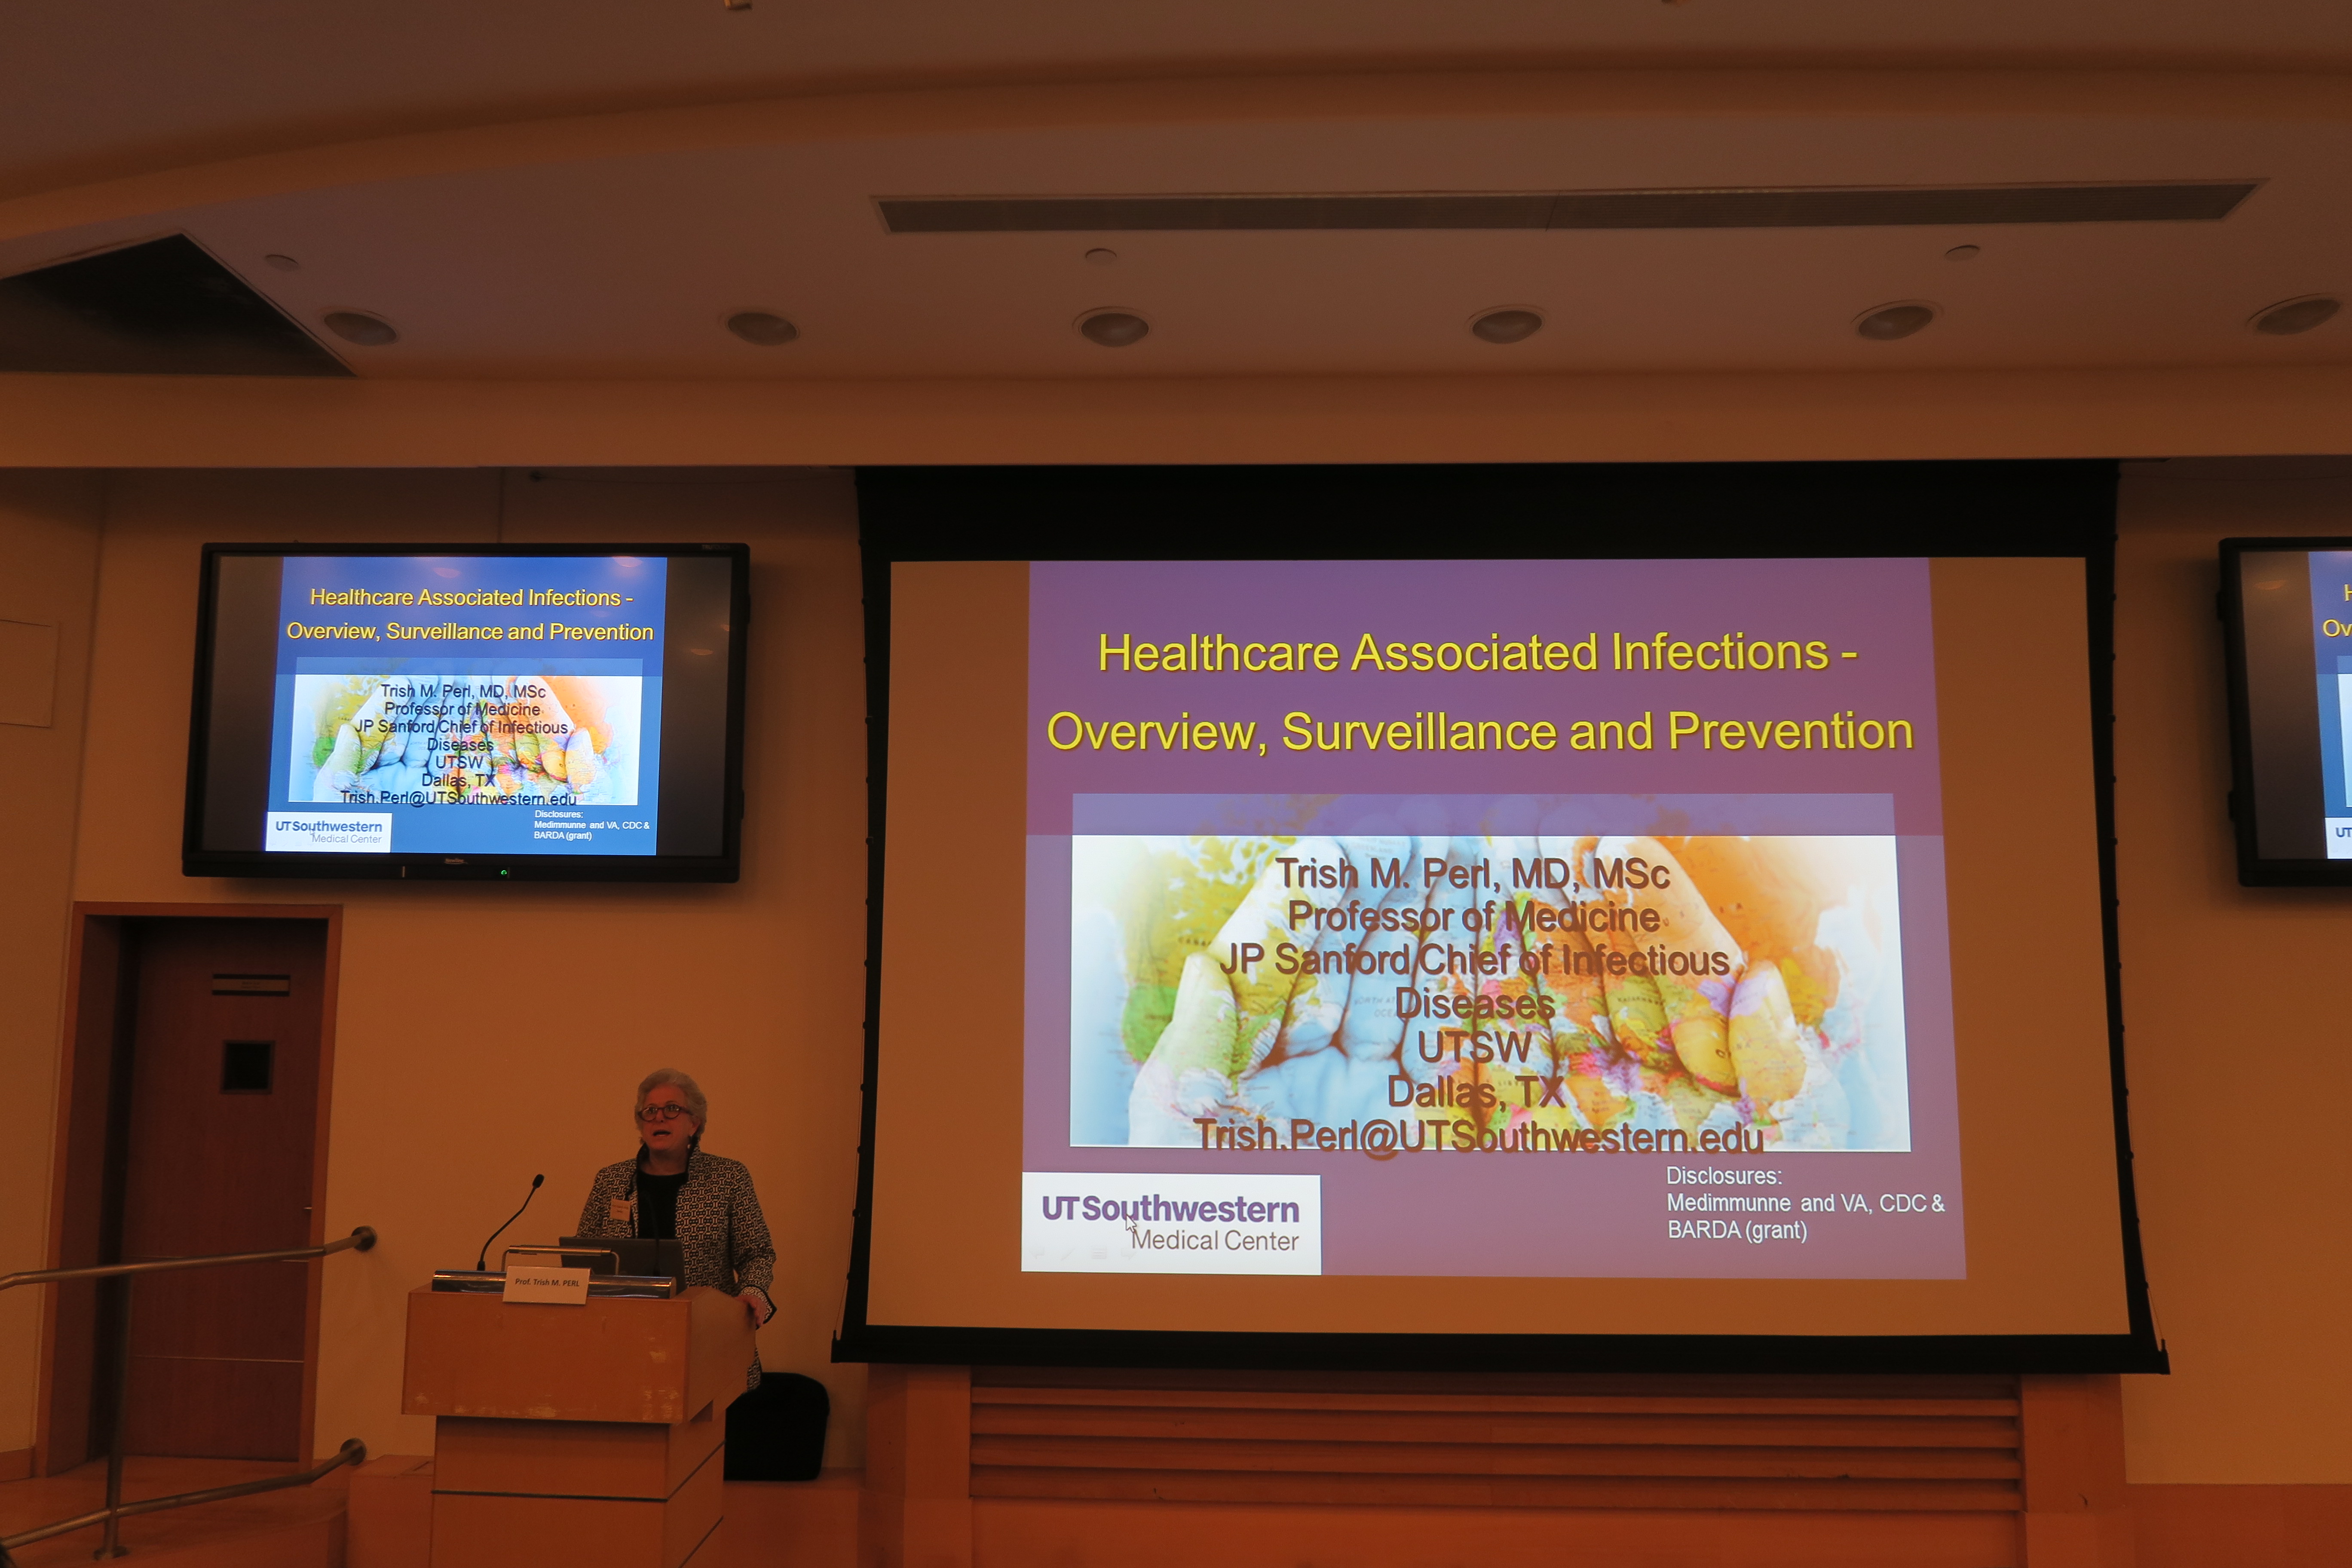 Symposium on Prevention of Healthcare-associated Infections in Hospitals and Community Institutions thumbnail